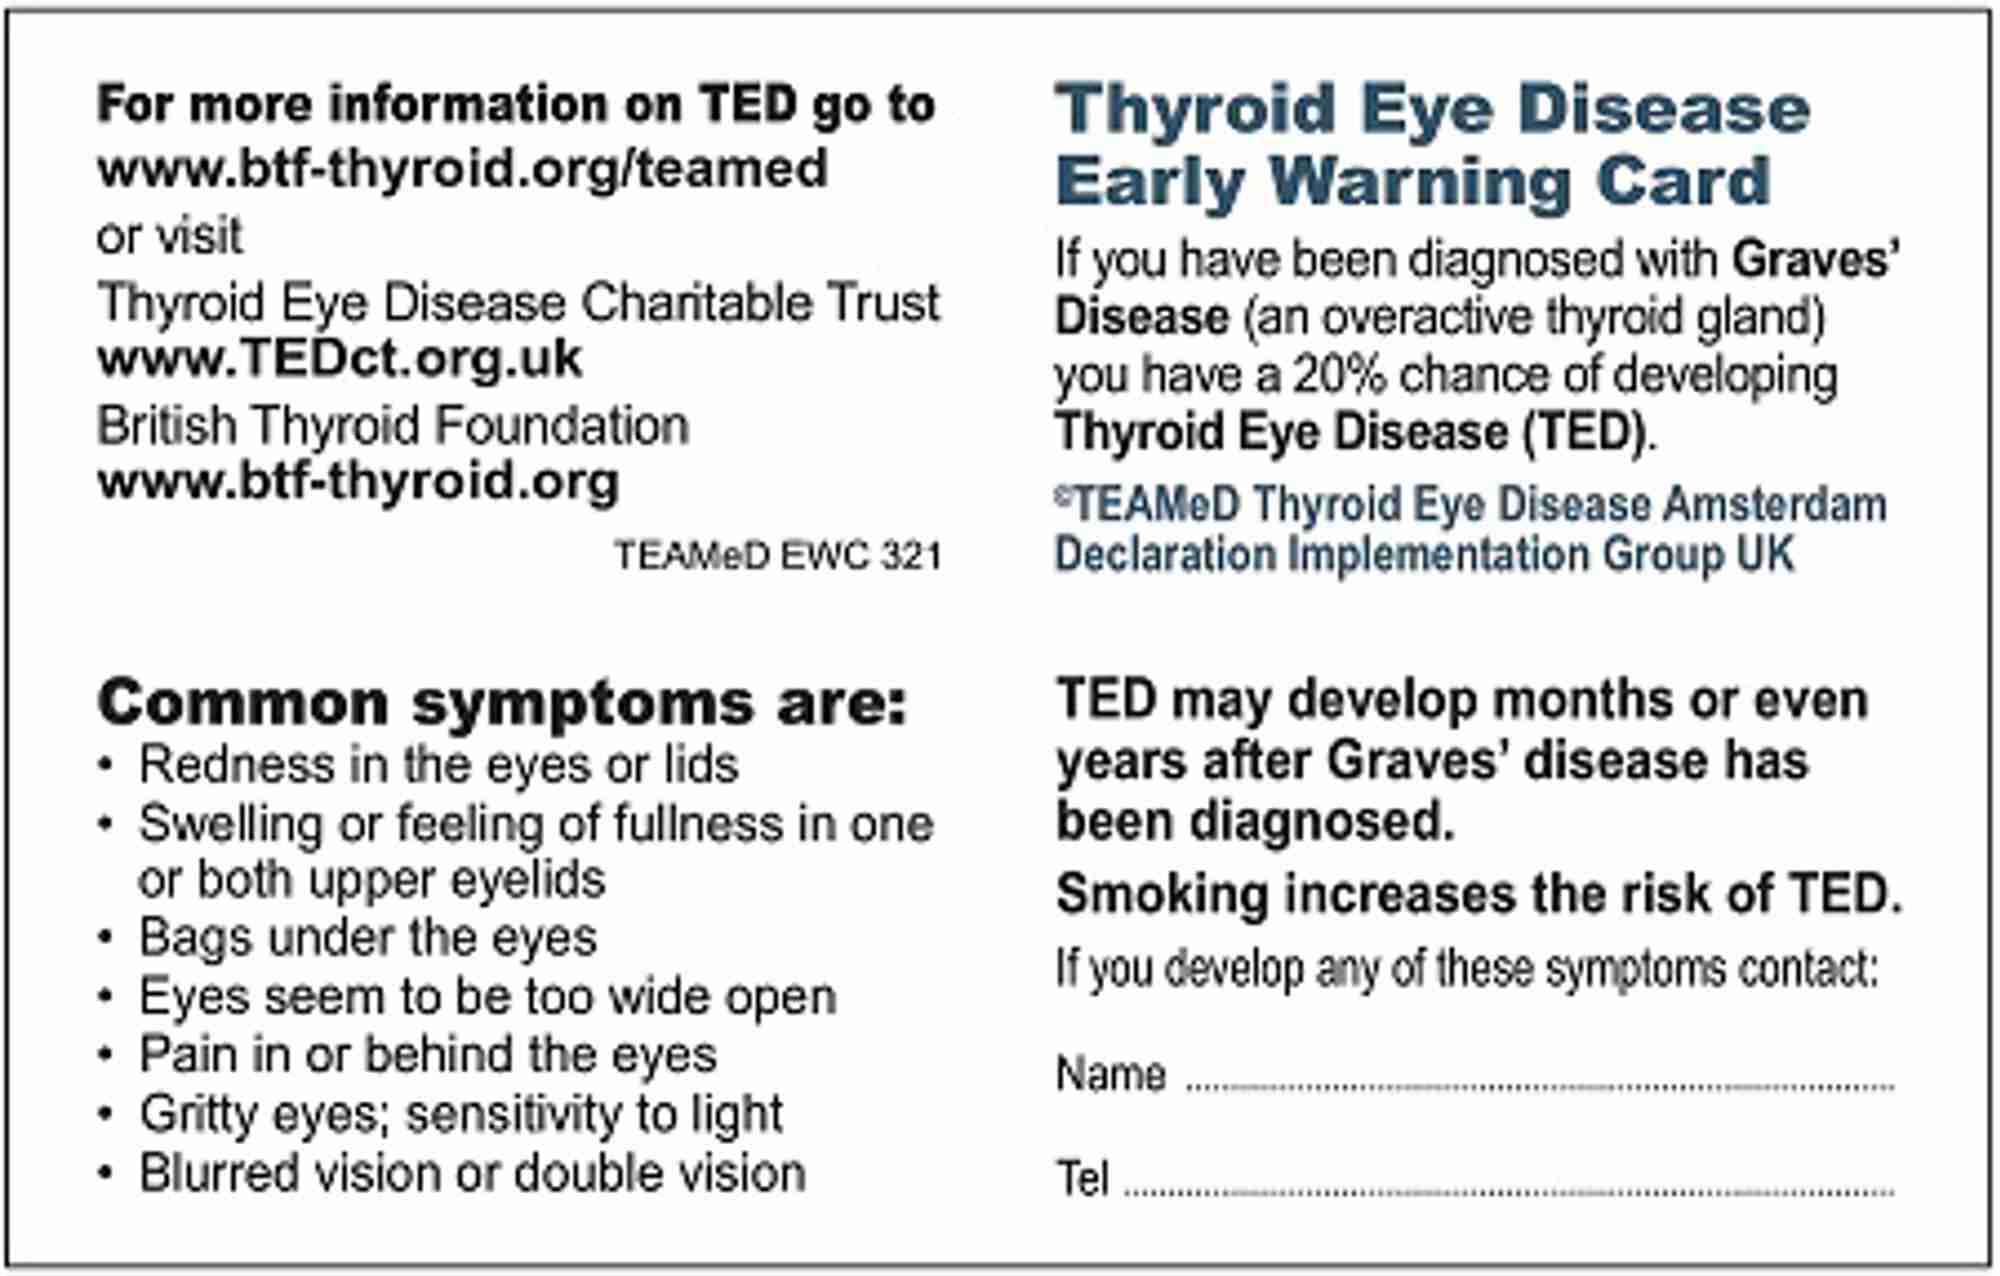 Figure 2. TED Early Warning Card